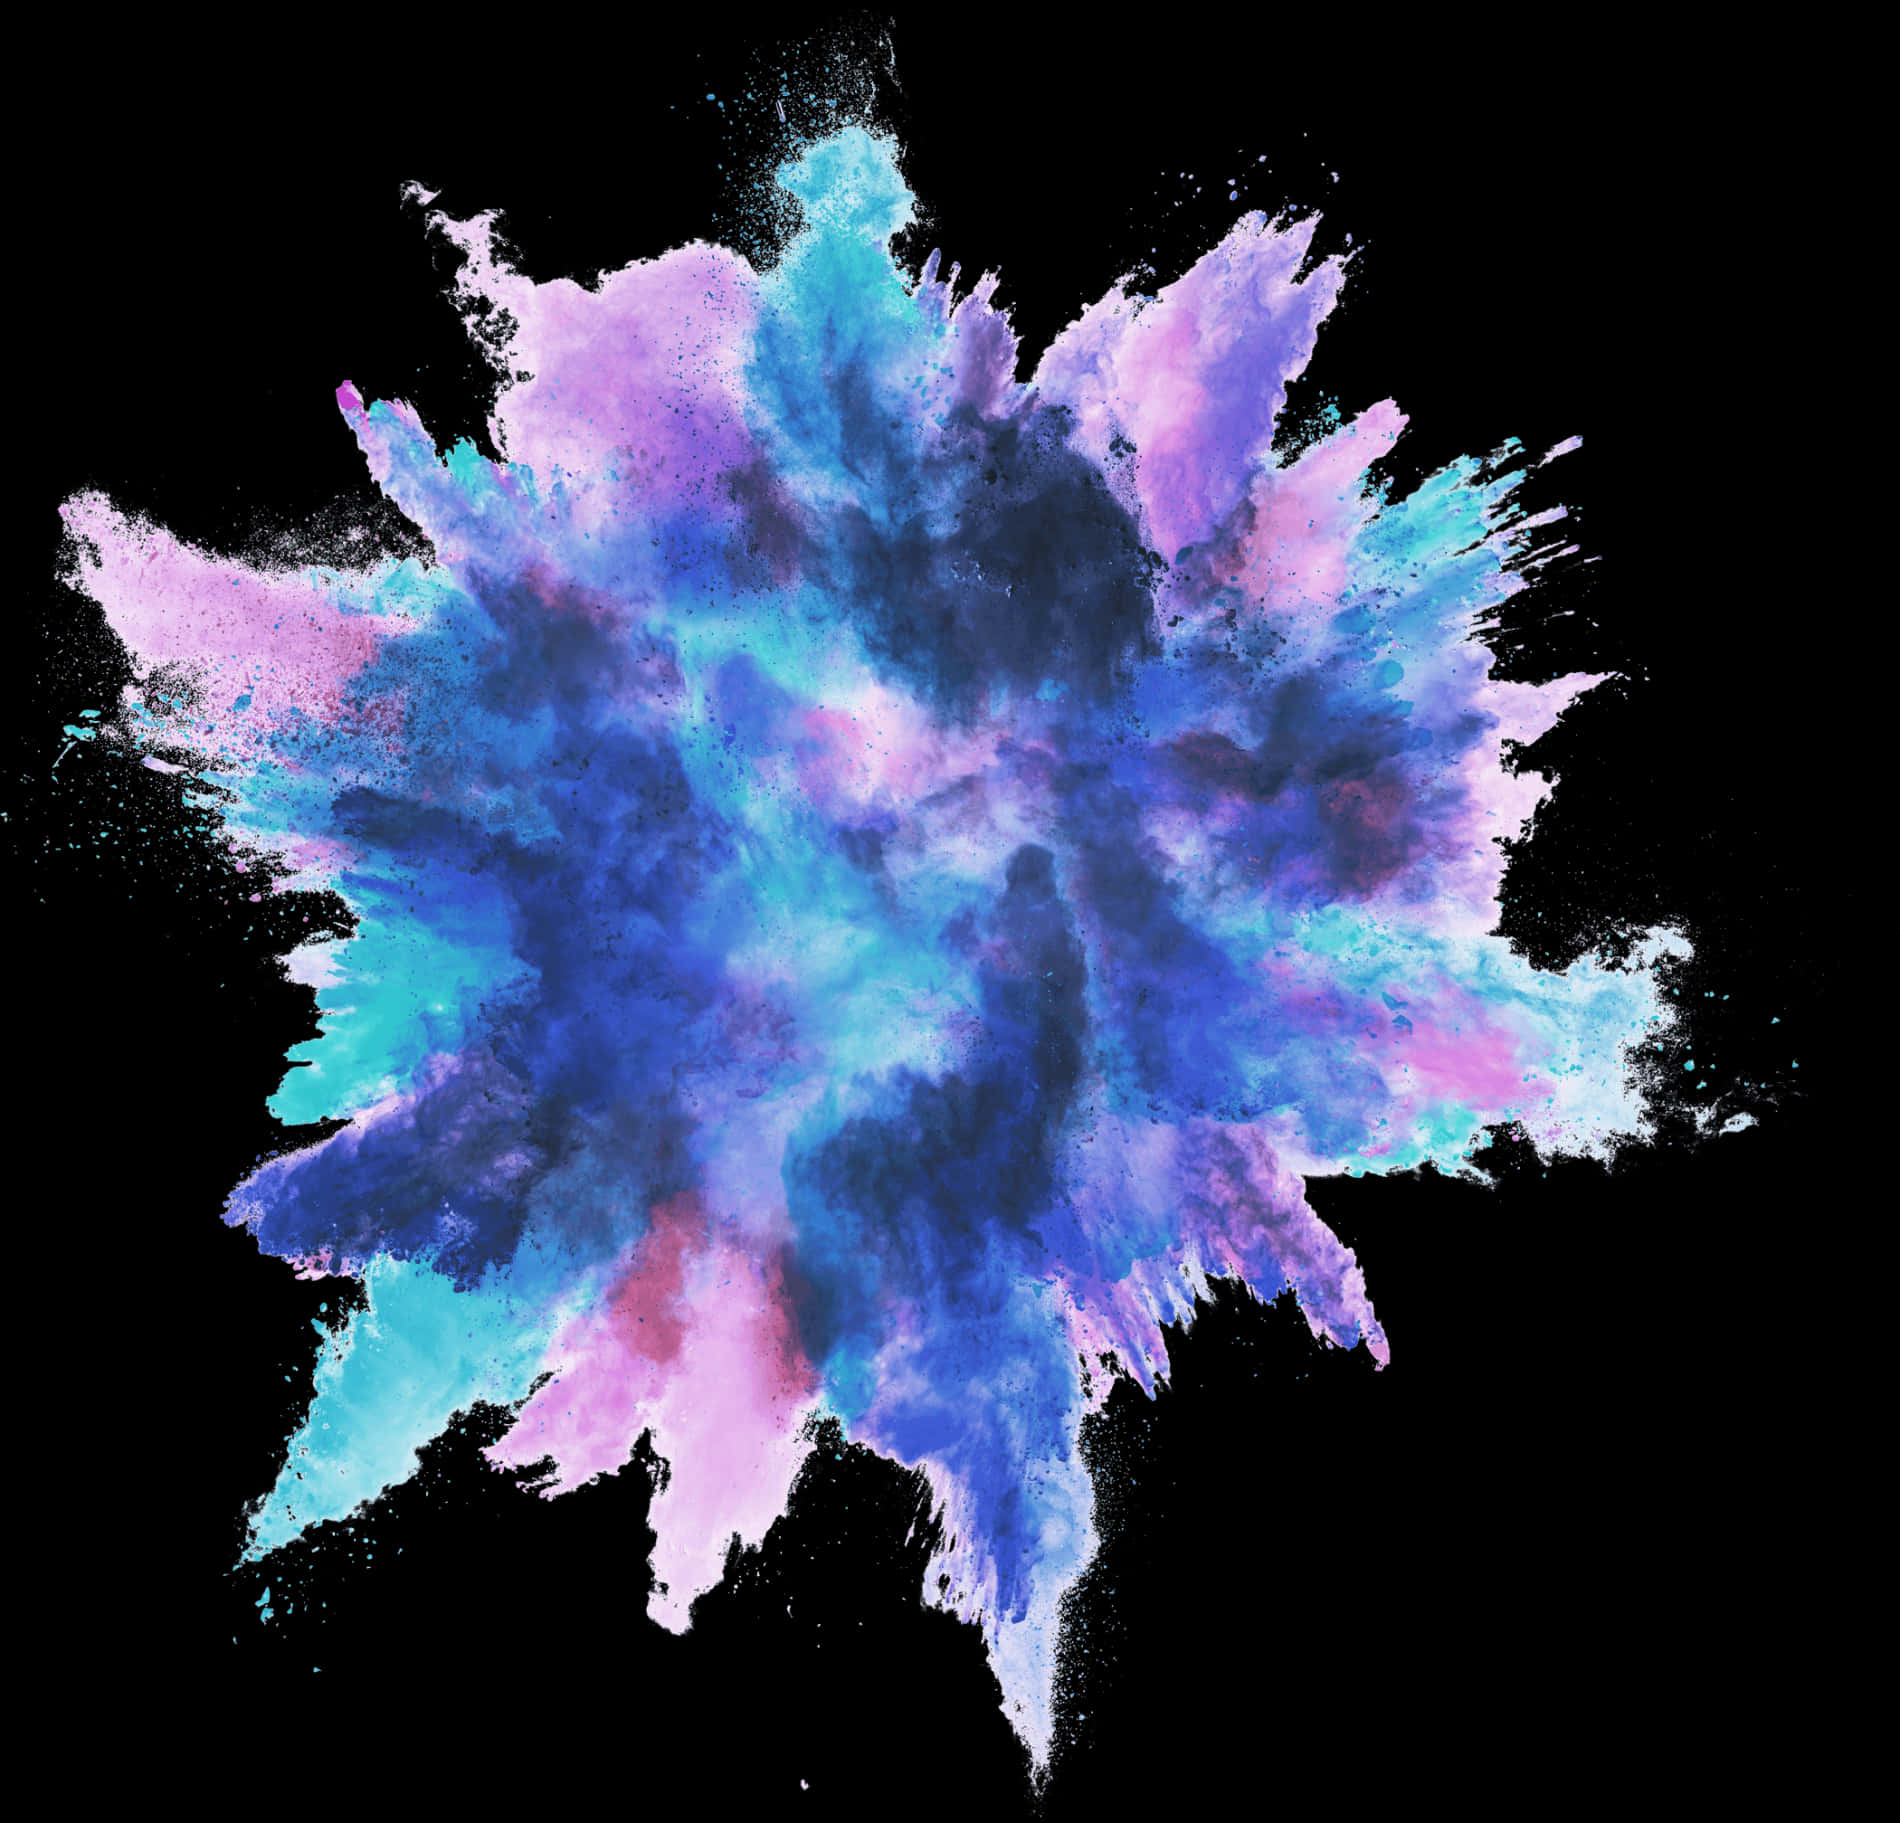 A Colorful Powder Explosion On A Black Background